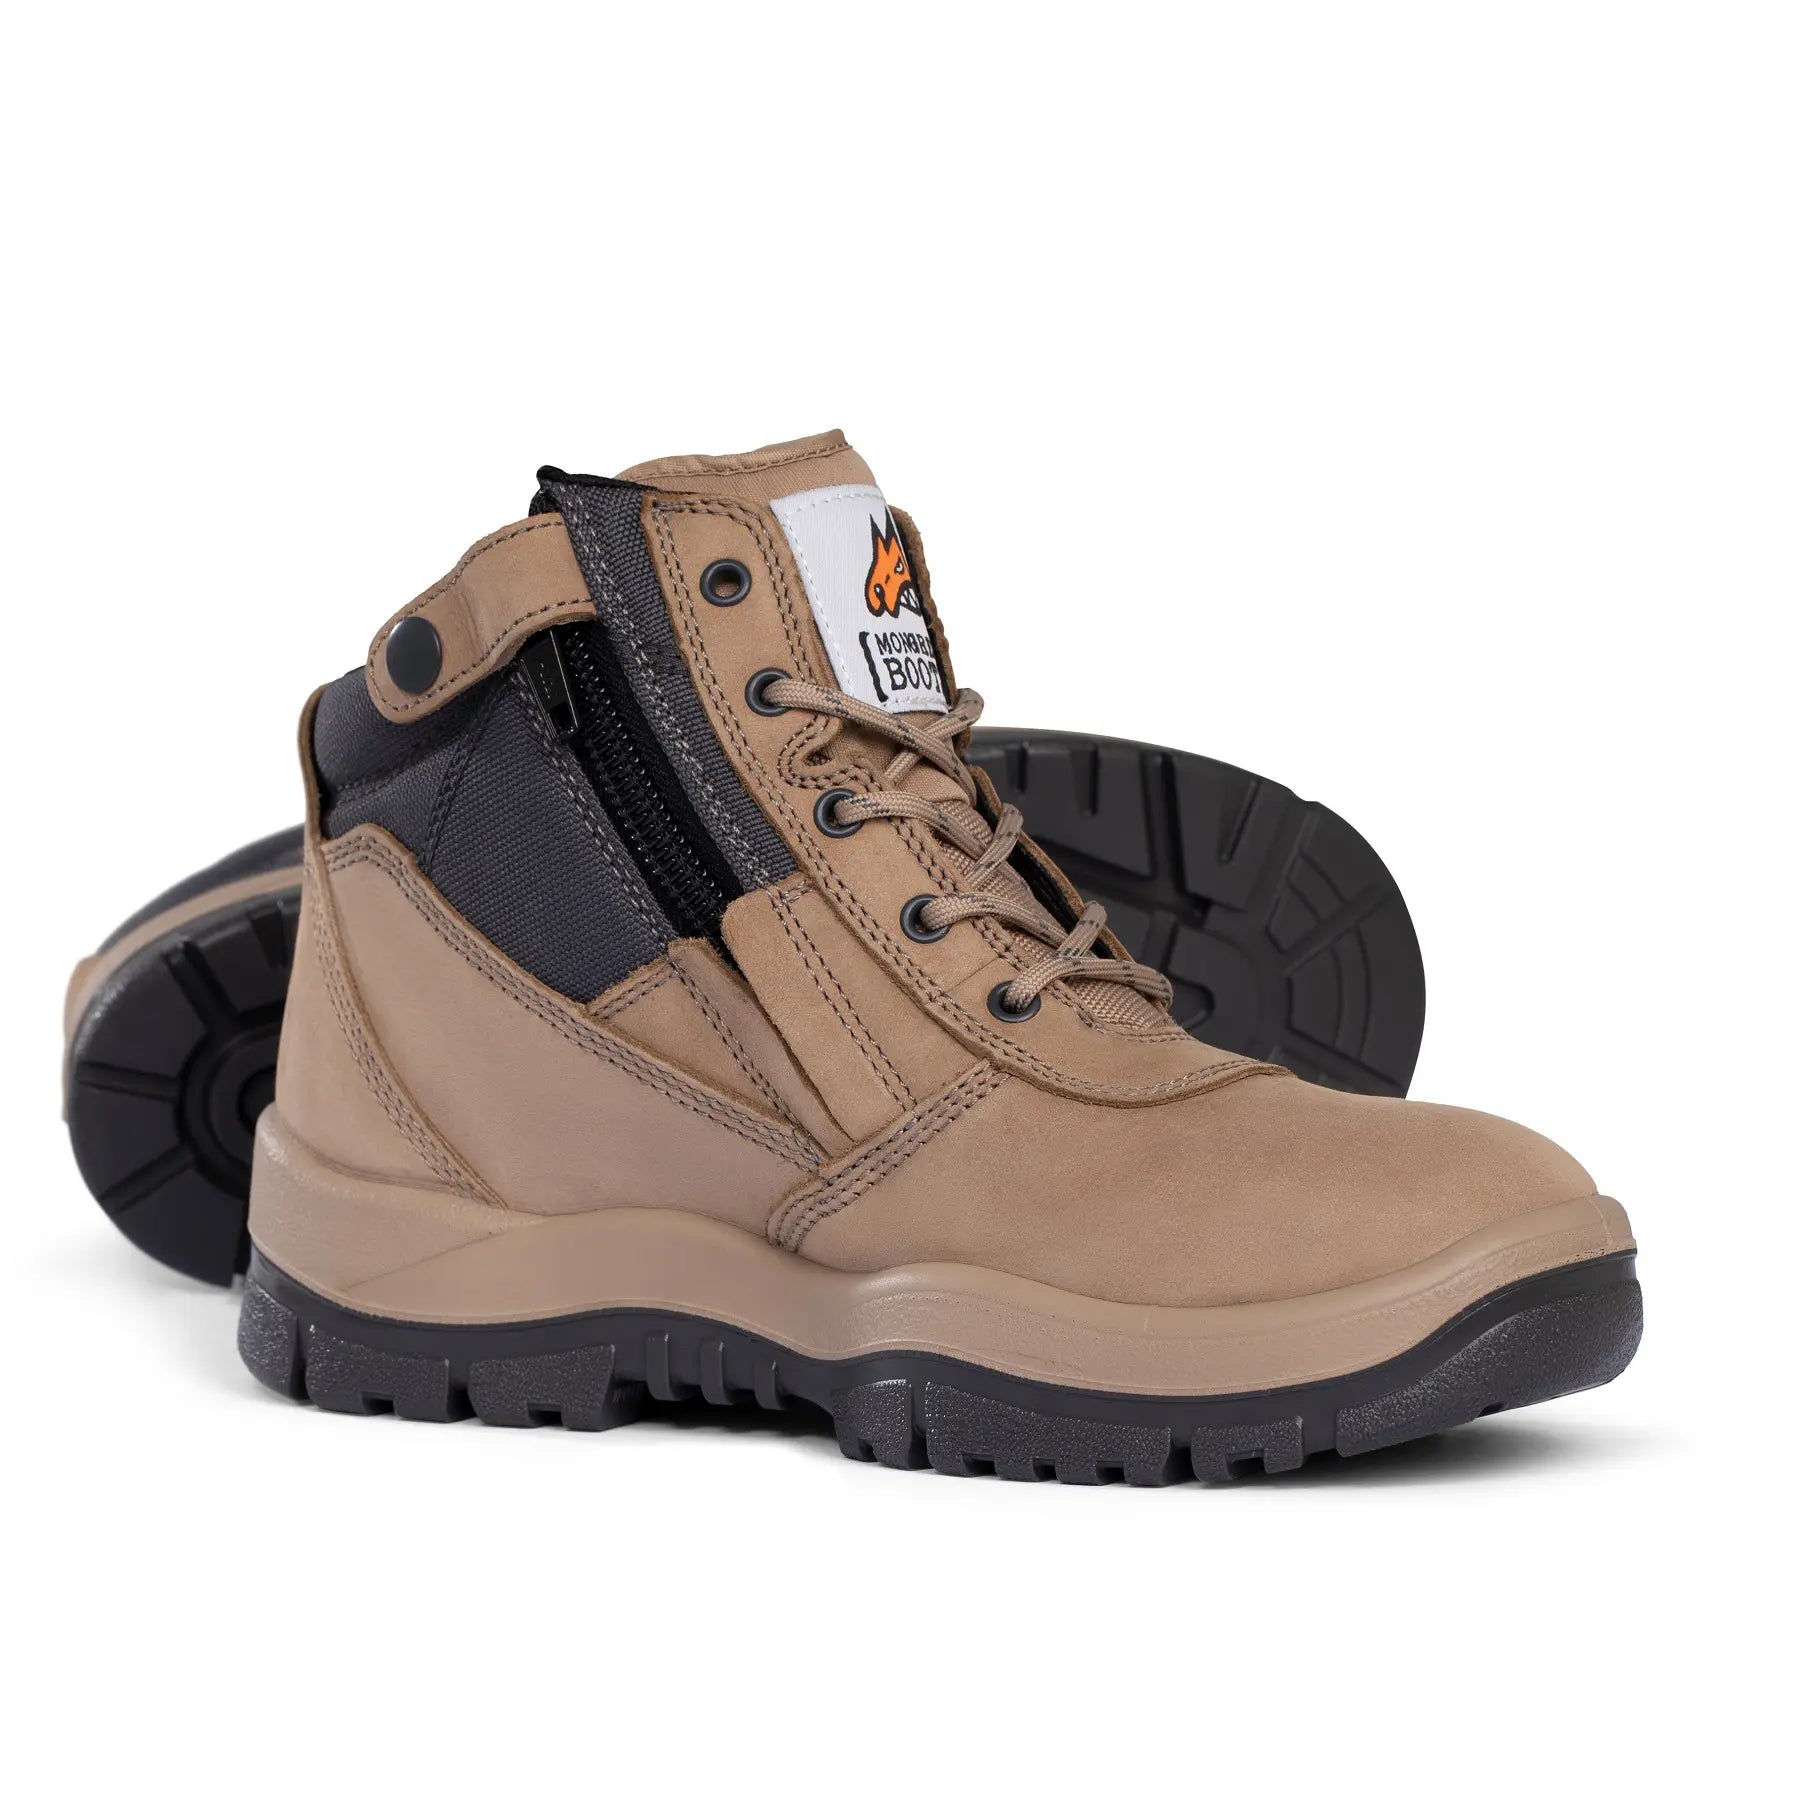 Mongrel 961060 Stone Non Safety Zip Sider Boot